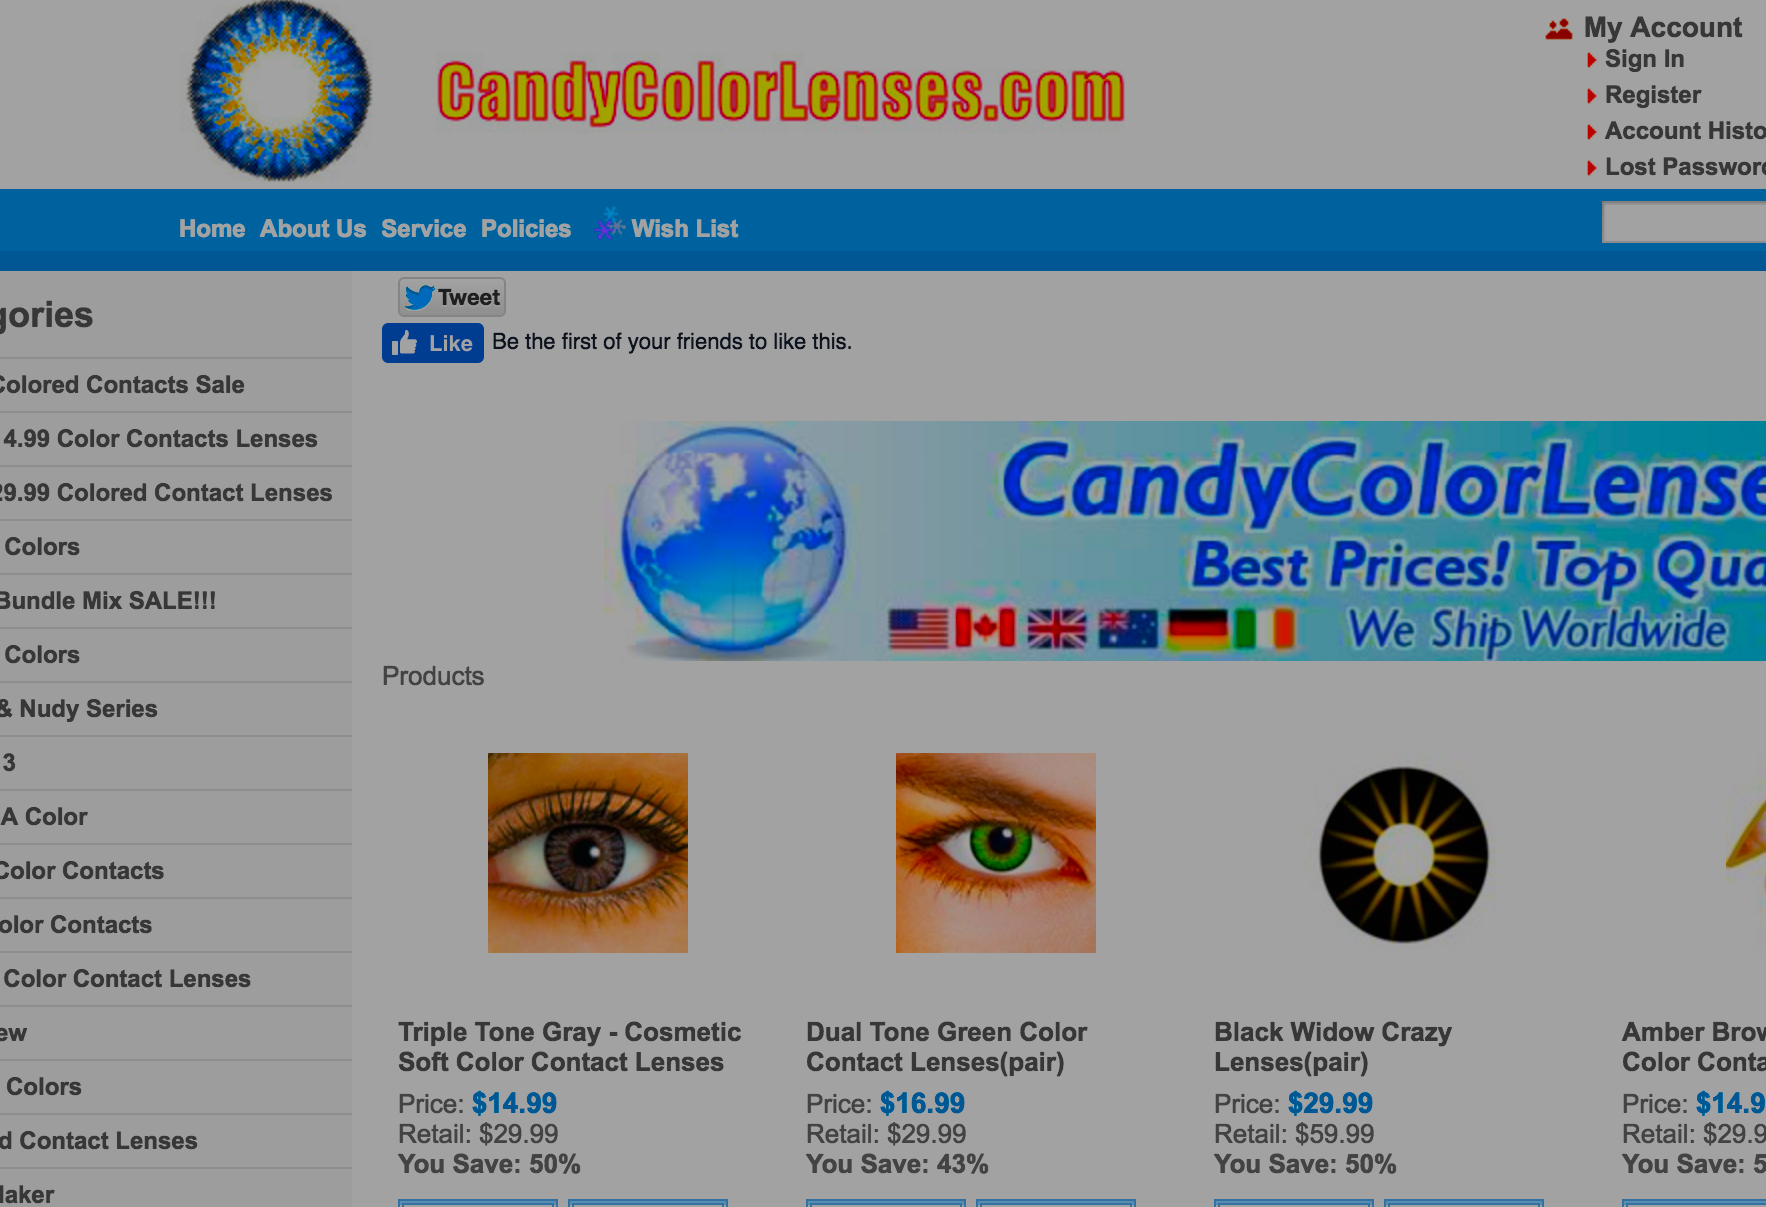 Owner Of Online Colored Contact Lens Store Pleads Guilty To Importing & Selling Counterfeit Lenses